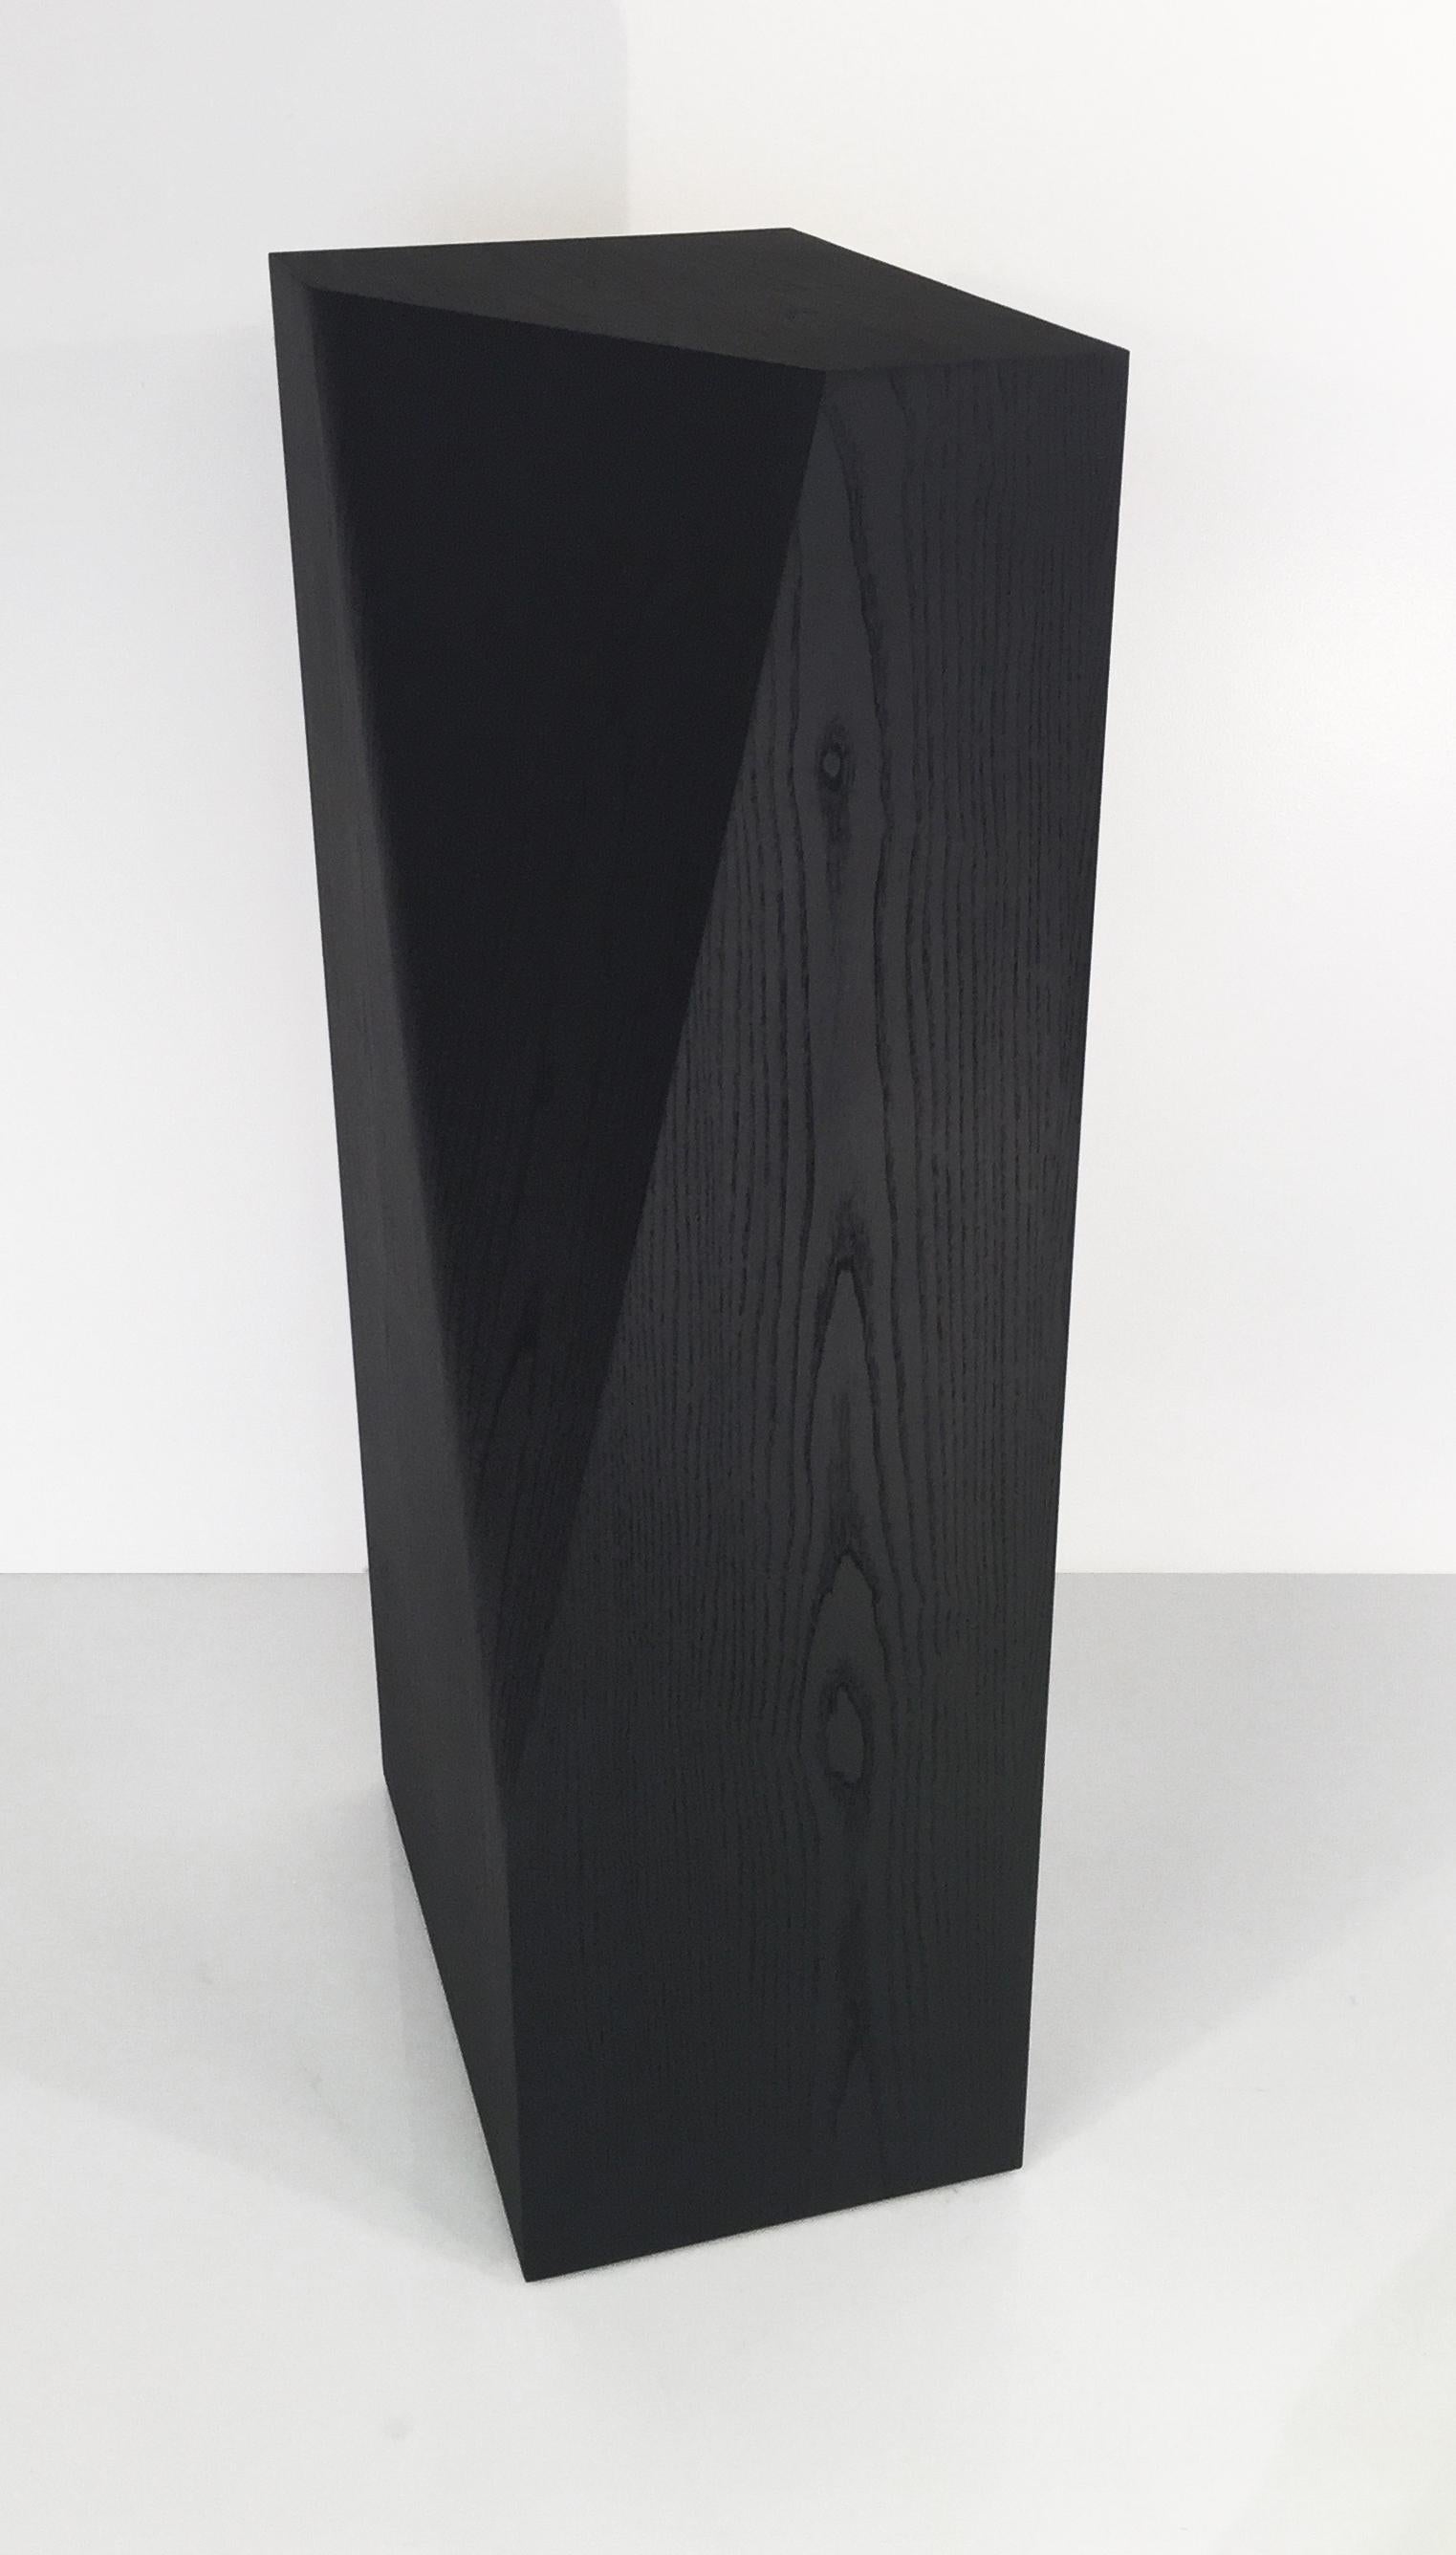 Minimalist 'scarecrow' william earle's modernist pedestal still made by hand by the artist